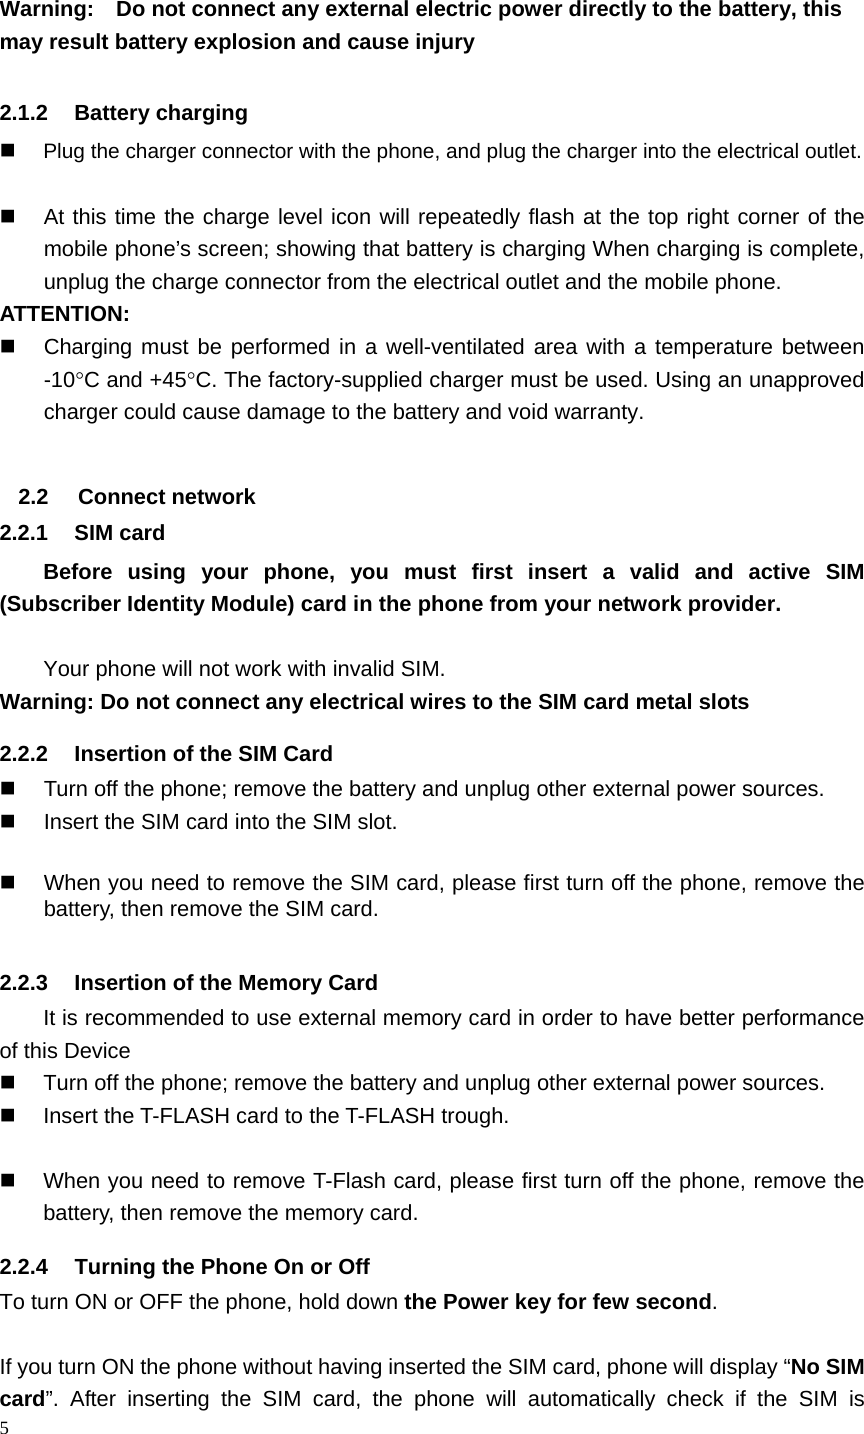 5   Warning:    Do not connect any external electric power directly to the battery, this may result battery explosion and cause injury  2.1.2 Battery charging  Plug the charger connector with the phone, and plug the charger into the electrical outlet.    At this time the charge level icon will repeatedly flash at the top right corner of the mobile phone’s screen; showing that battery is charging When charging is complete, unplug the charge connector from the electrical outlet and the mobile phone. ATTENTION:   Charging must be performed in a well-ventilated area with a temperature between -10C and +45C. The factory-supplied charger must be used. Using an unapproved charger could cause damage to the battery and void warranty.  2.2 Connect network 2.2.1 SIM card Before using your phone, you must first insert a valid and active SIM (Subscriber Identity Module) card in the phone from your network provider.    Your phone will not work with invalid SIM. Warning: Do not connect any electrical wires to the SIM card metal slots 2.2.2  Insertion of the SIM Card   Turn off the phone; remove the battery and unplug other external power sources.   Insert the SIM card into the SIM slot.    When you need to remove the SIM card, please first turn off the phone, remove the battery, then remove the SIM card.  2.2.3  Insertion of the Memory Card It is recommended to use external memory card in order to have better performance of this Device     Turn off the phone; remove the battery and unplug other external power sources.   Insert the T-FLASH card to the T-FLASH trough.    When you need to remove T-Flash card, please first turn off the phone, remove the battery, then remove the memory card.   2.2.4  Turning the Phone On or Off To turn ON or OFF the phone, hold down the Power key for few second.  If you turn ON the phone without having inserted the SIM card, phone will display “No SIM card”. After inserting the SIM card, the phone will automatically check if the SIM is 